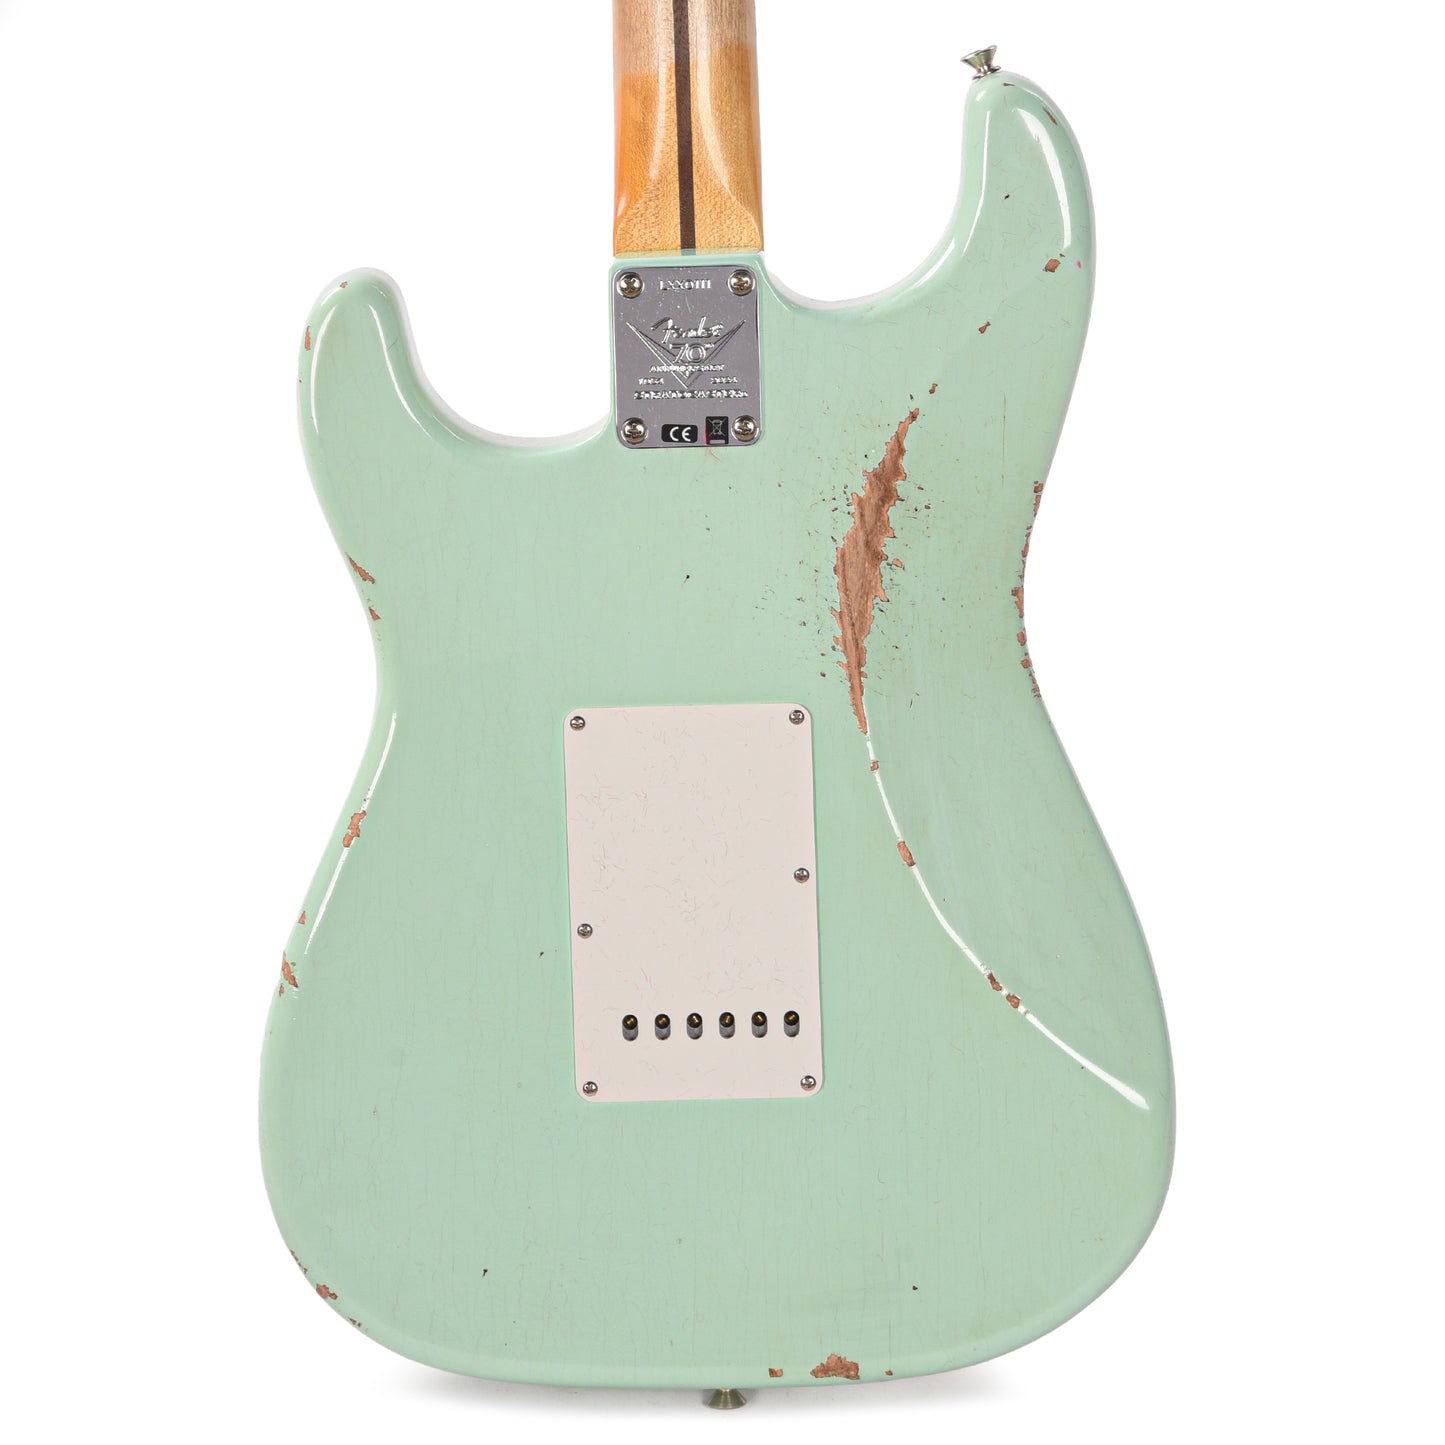 Fender Custom Shop Limited Edition Fat '54 Stratocaster Relic with Closet Classic Hardware Super Faded Aged Surf Green